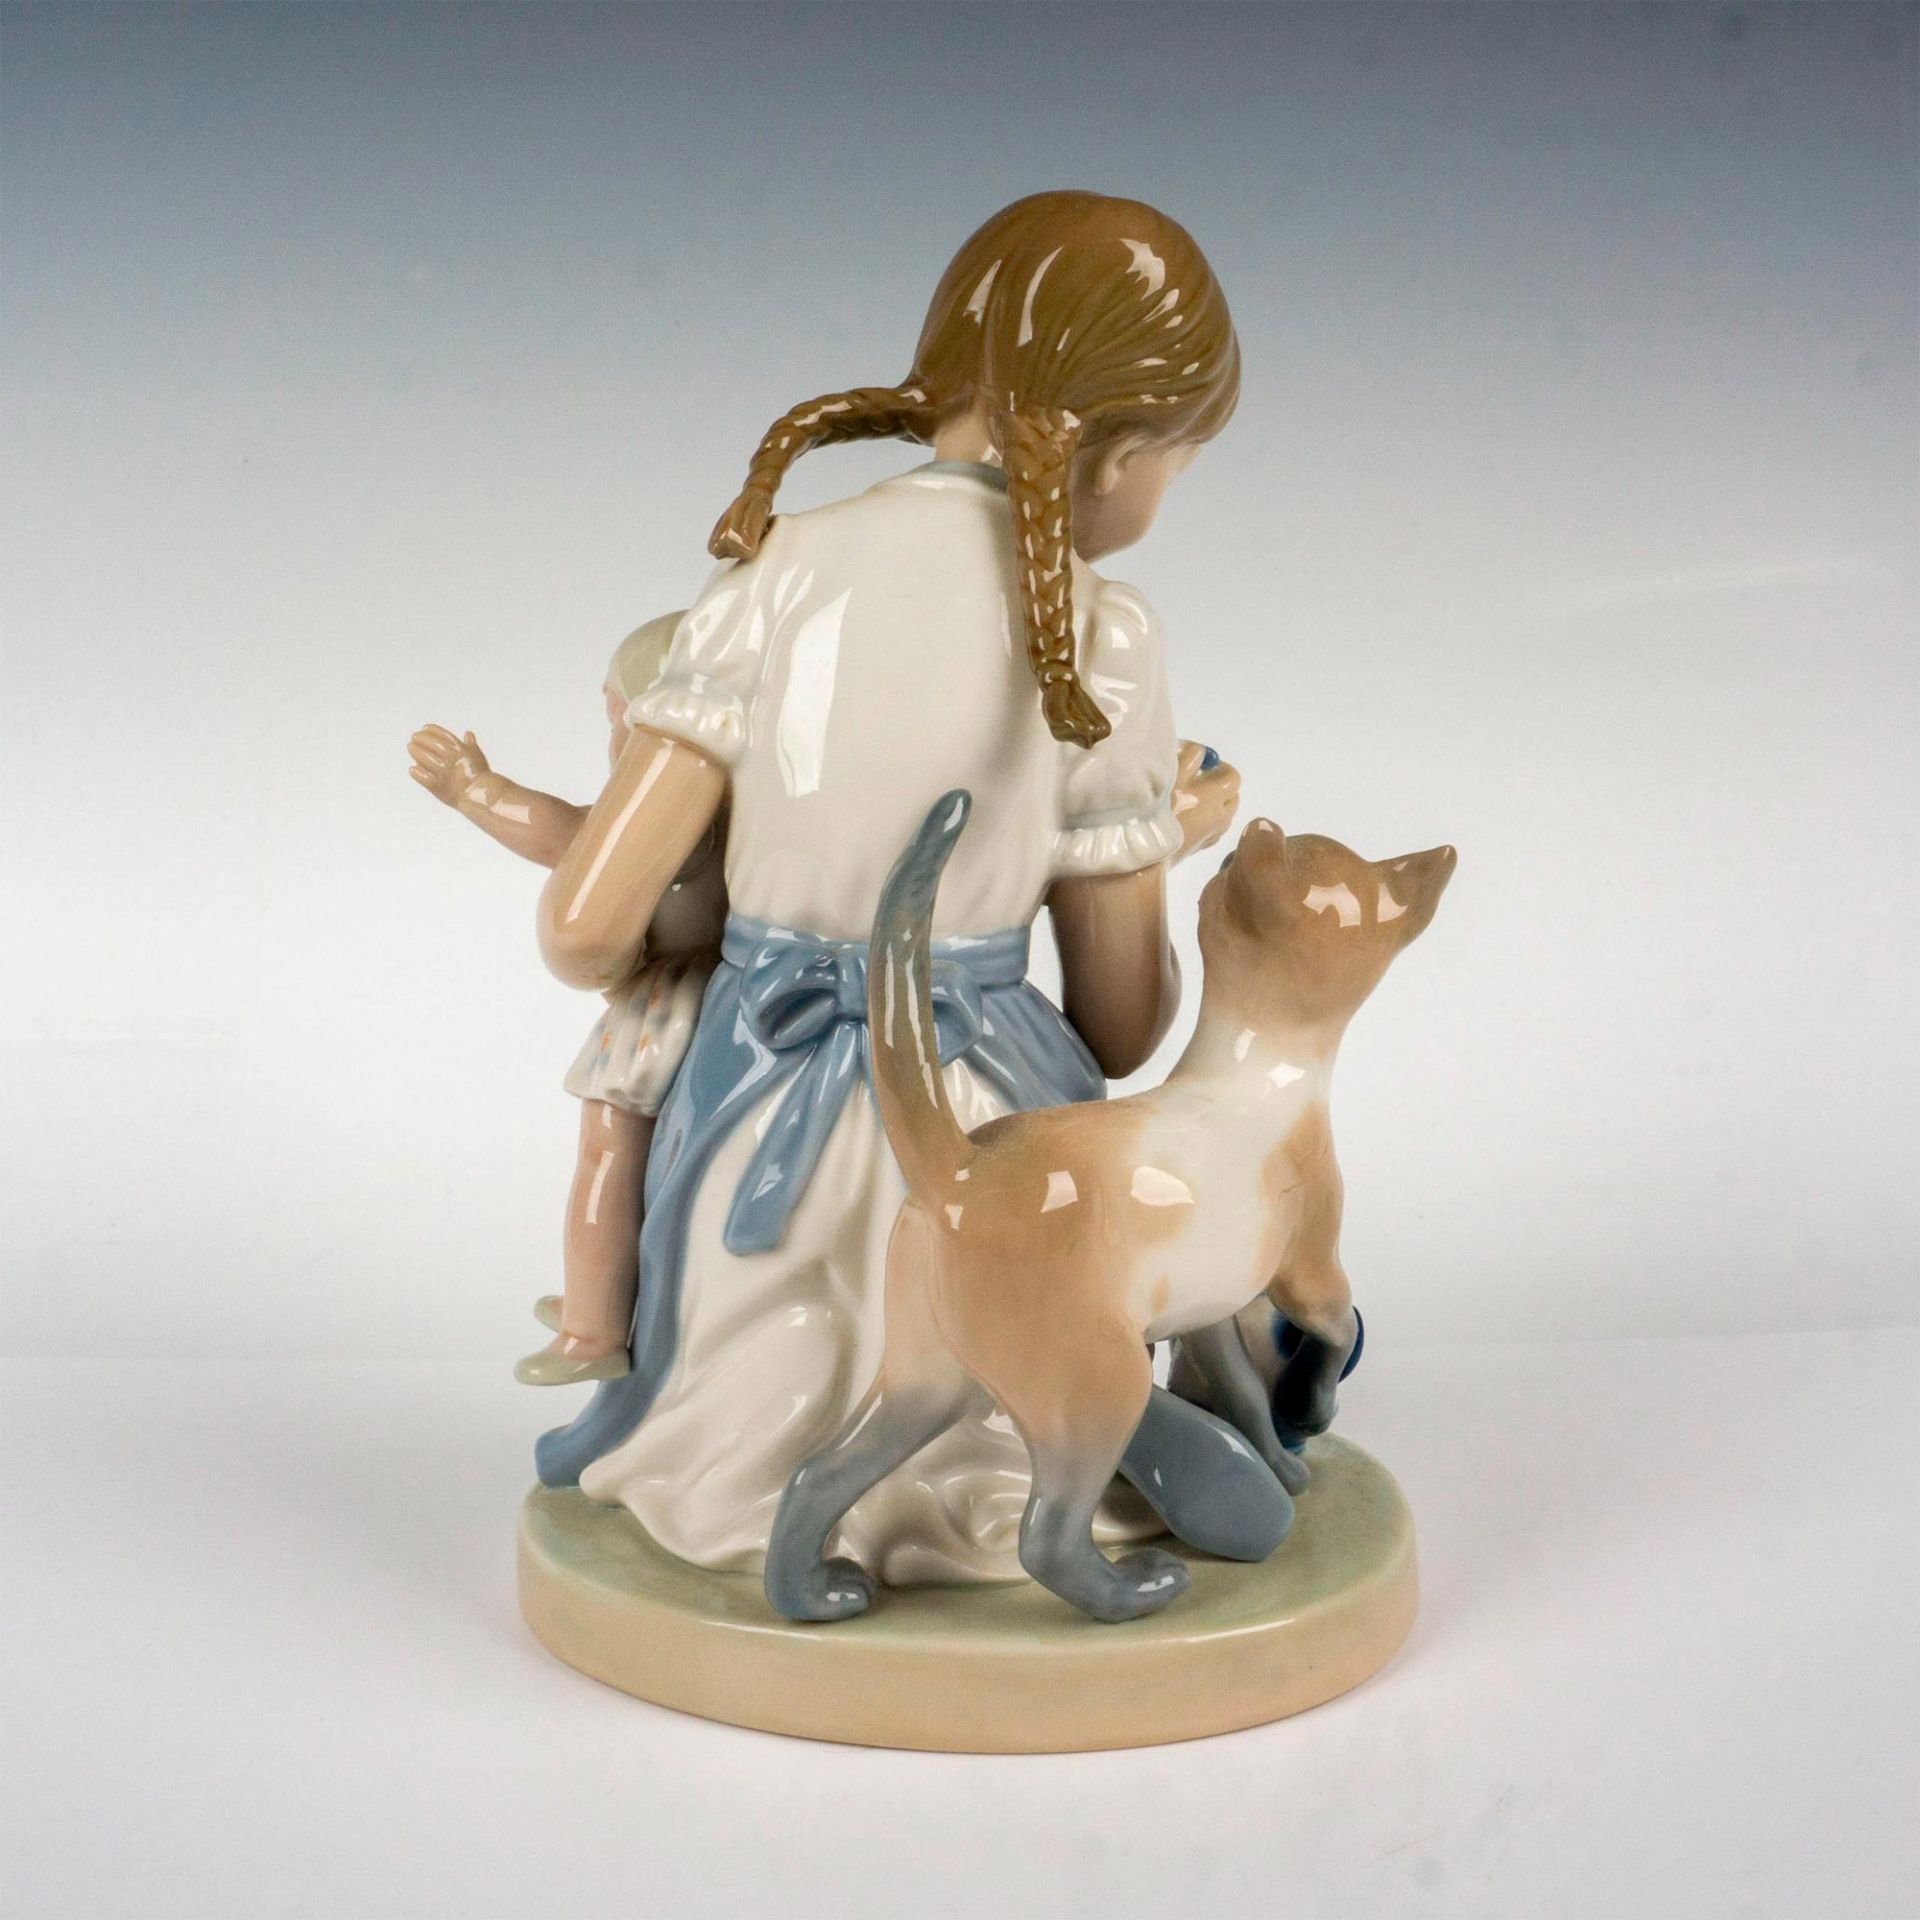 Childs Play 1001280 - Lladro Porcelain Figurine - Image 2 of 3